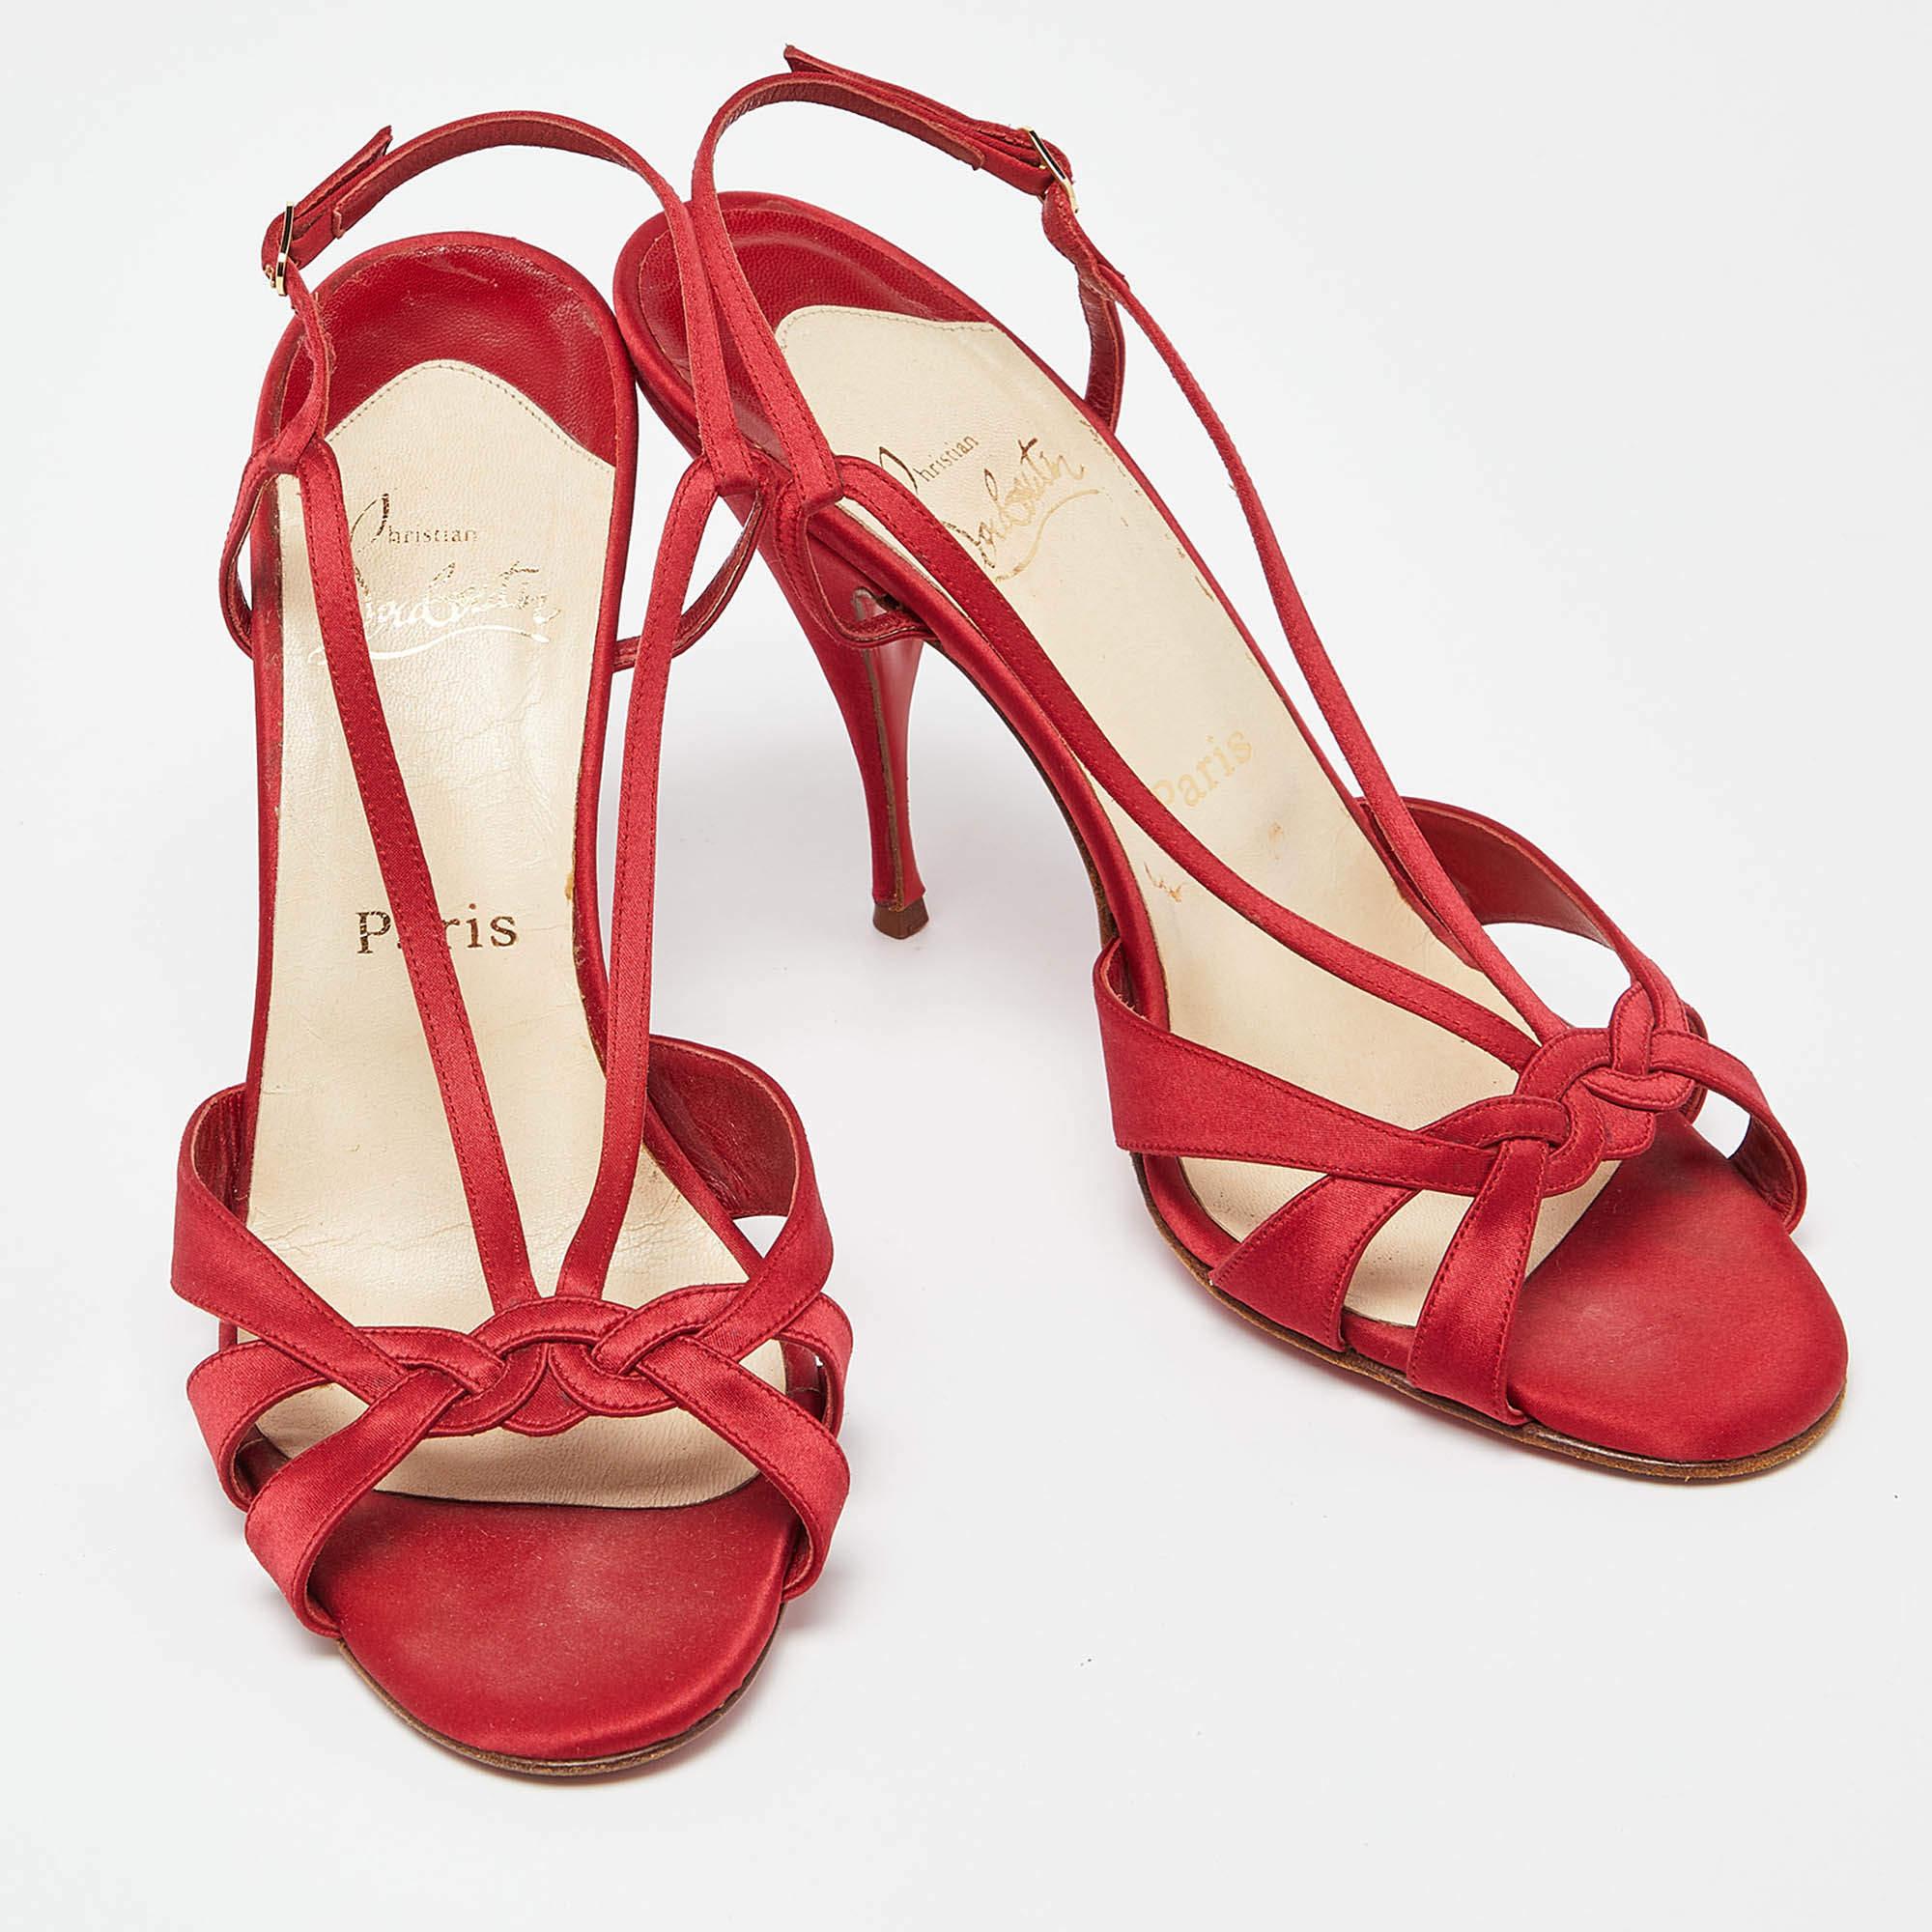 Christian Louboutin Red Satin Buckle Slingback Sandals Size 41 For Sale 1